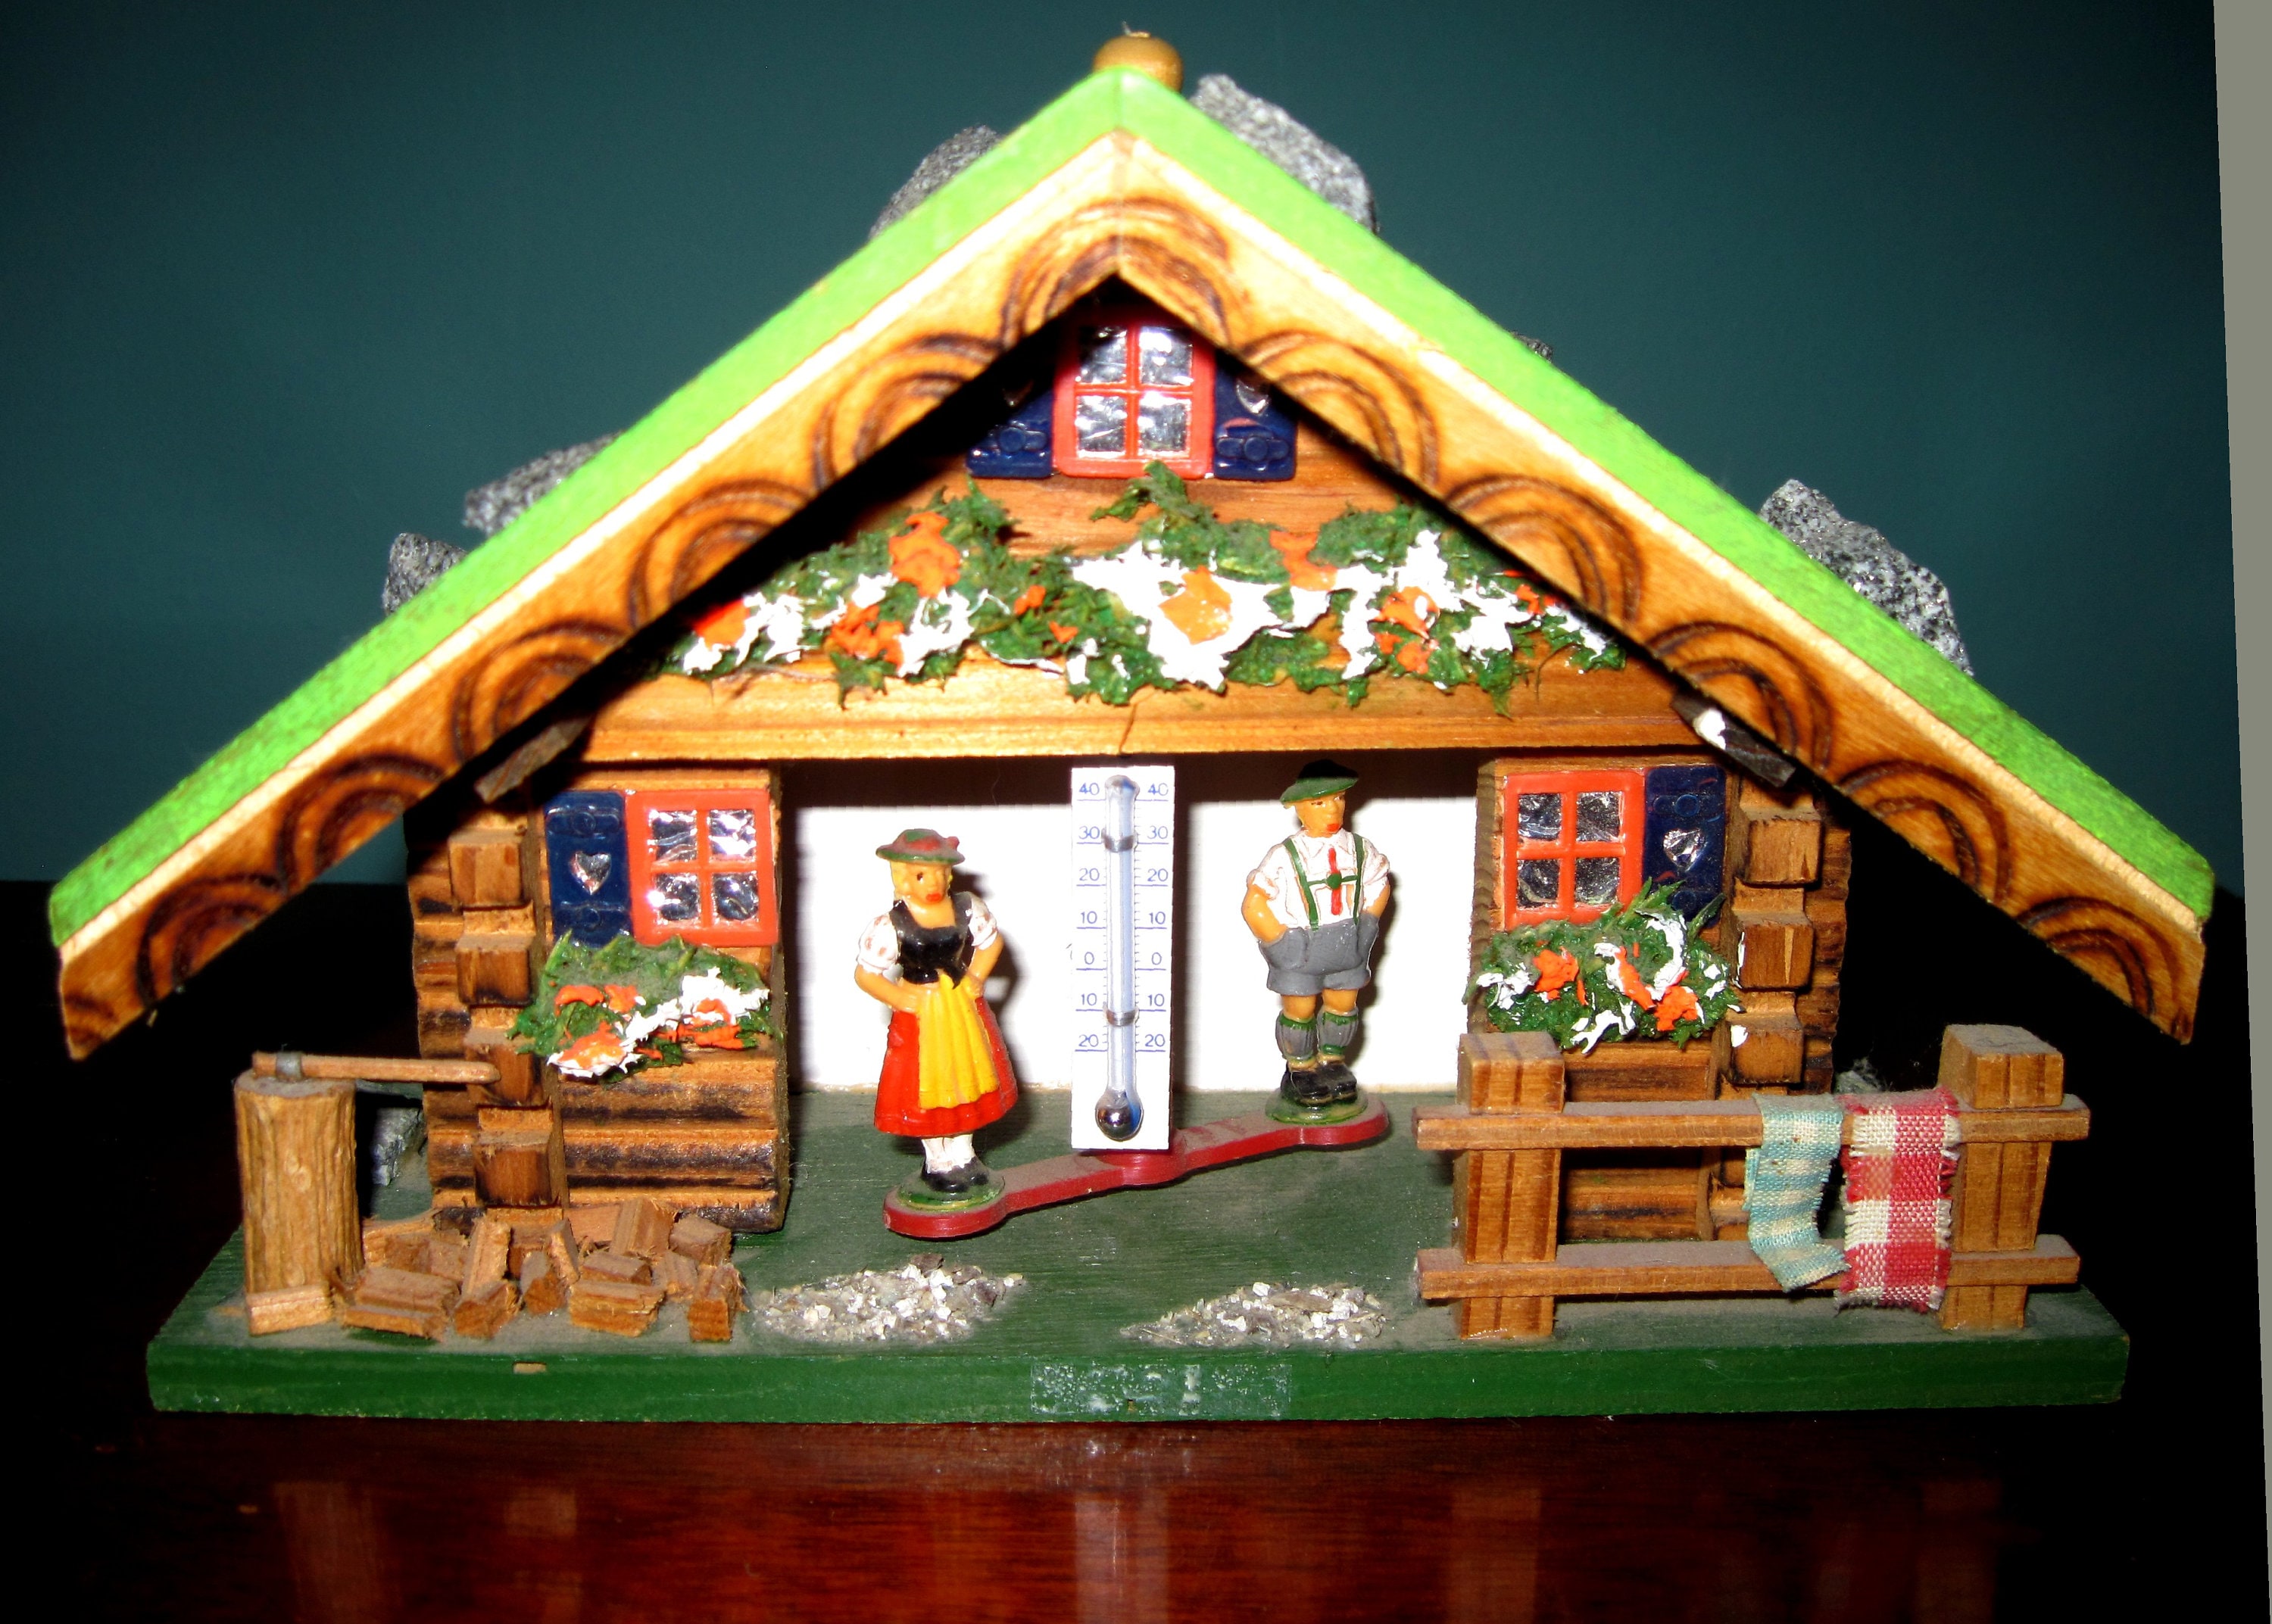 862 Wooden Black Forest German Weather House with Thermometer